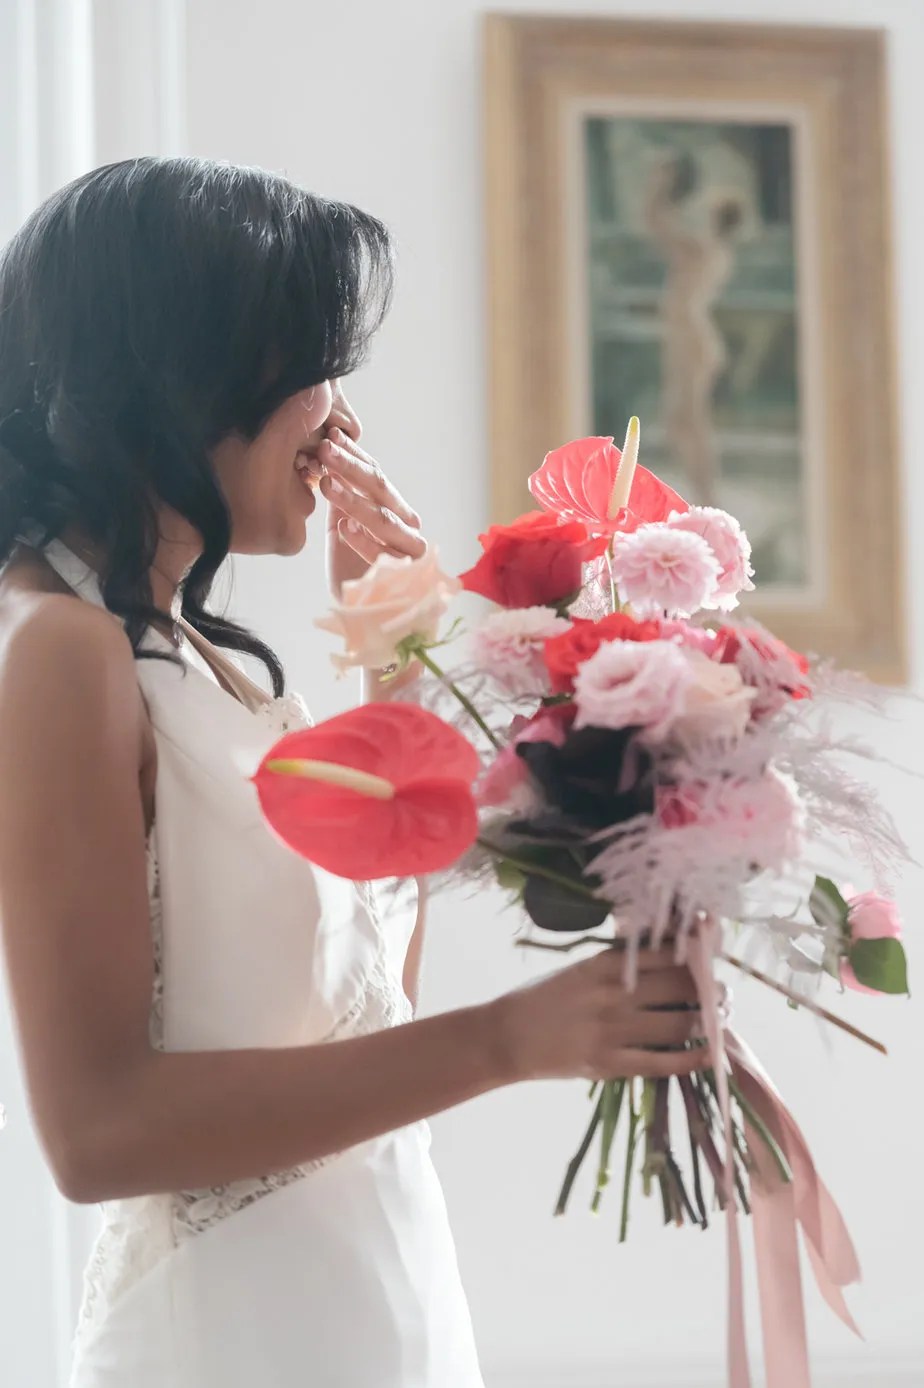 How To Prevent A Rosacea Flare Up Before Your Wedding